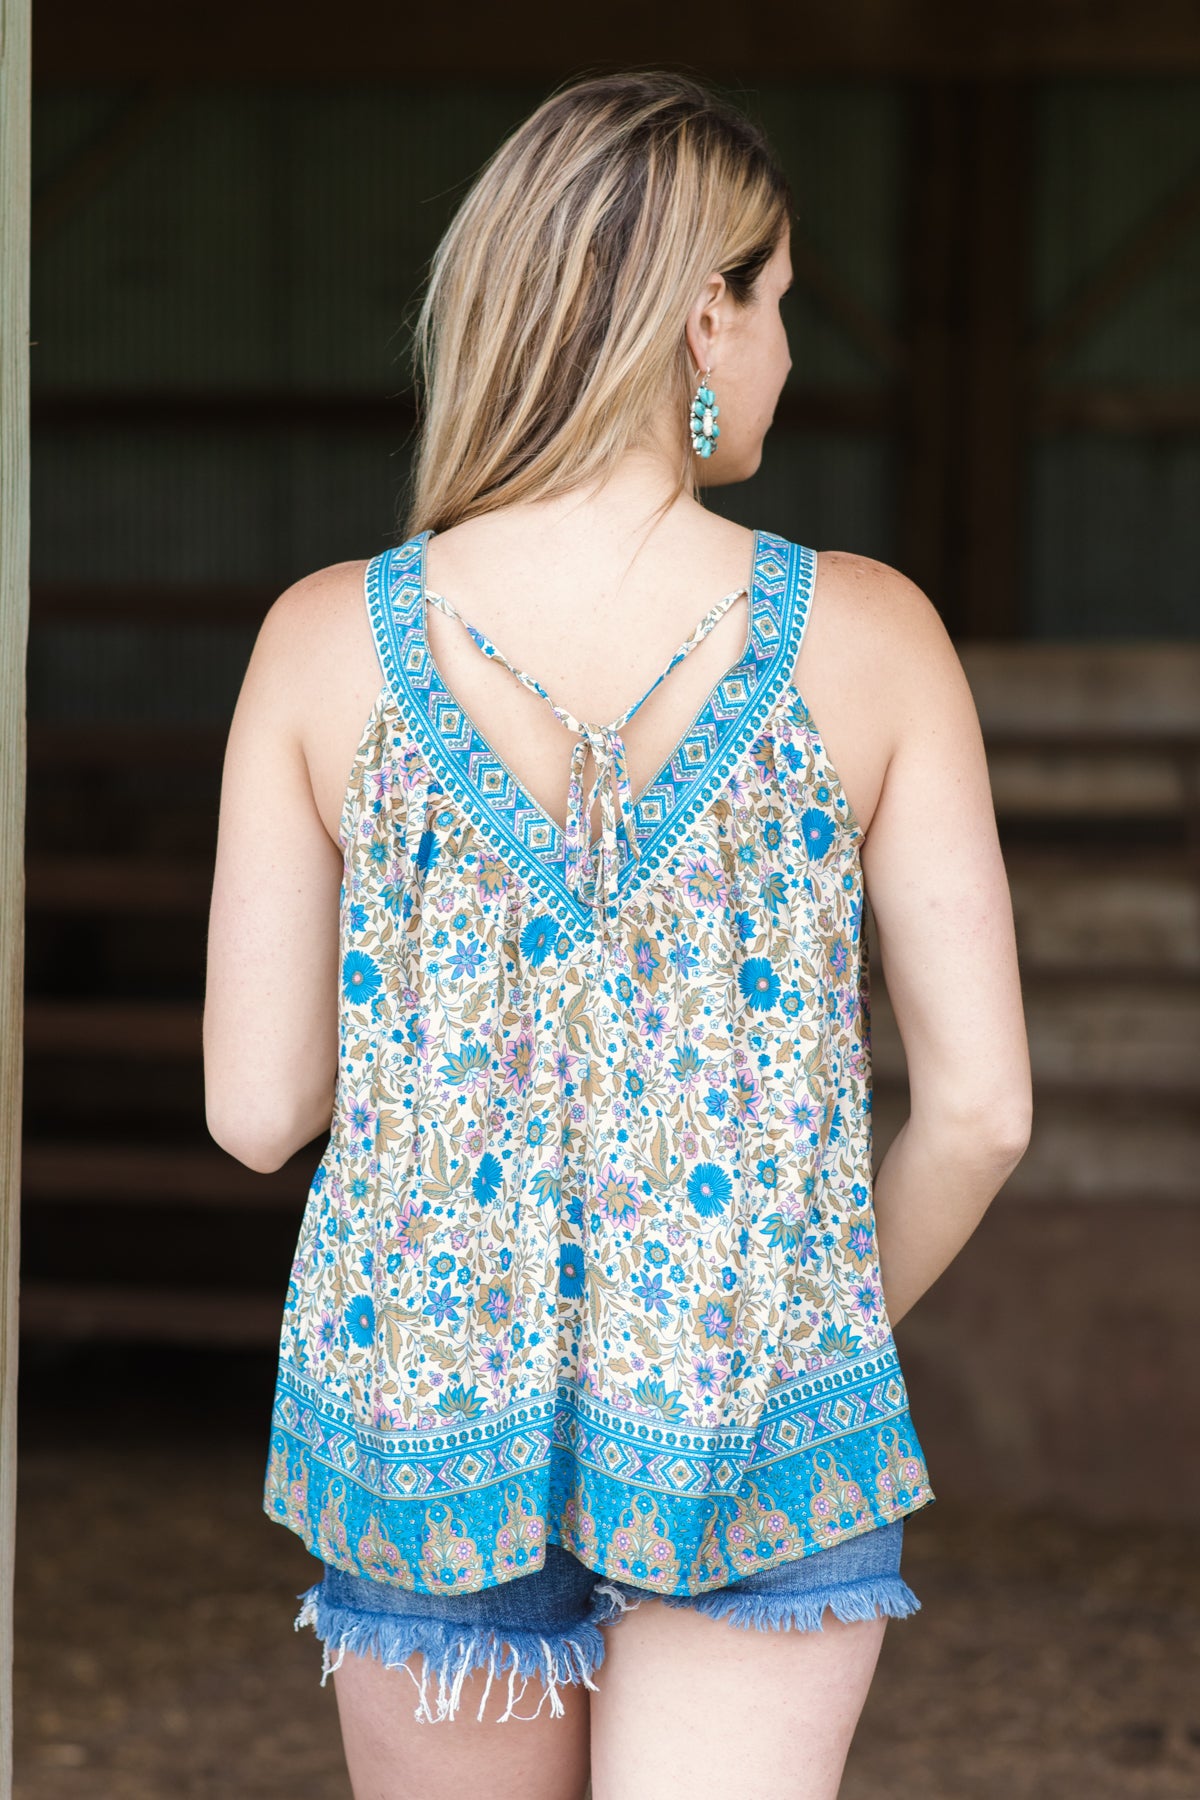 Sky Blue Floral Print Pleat Detail - Filly Flair